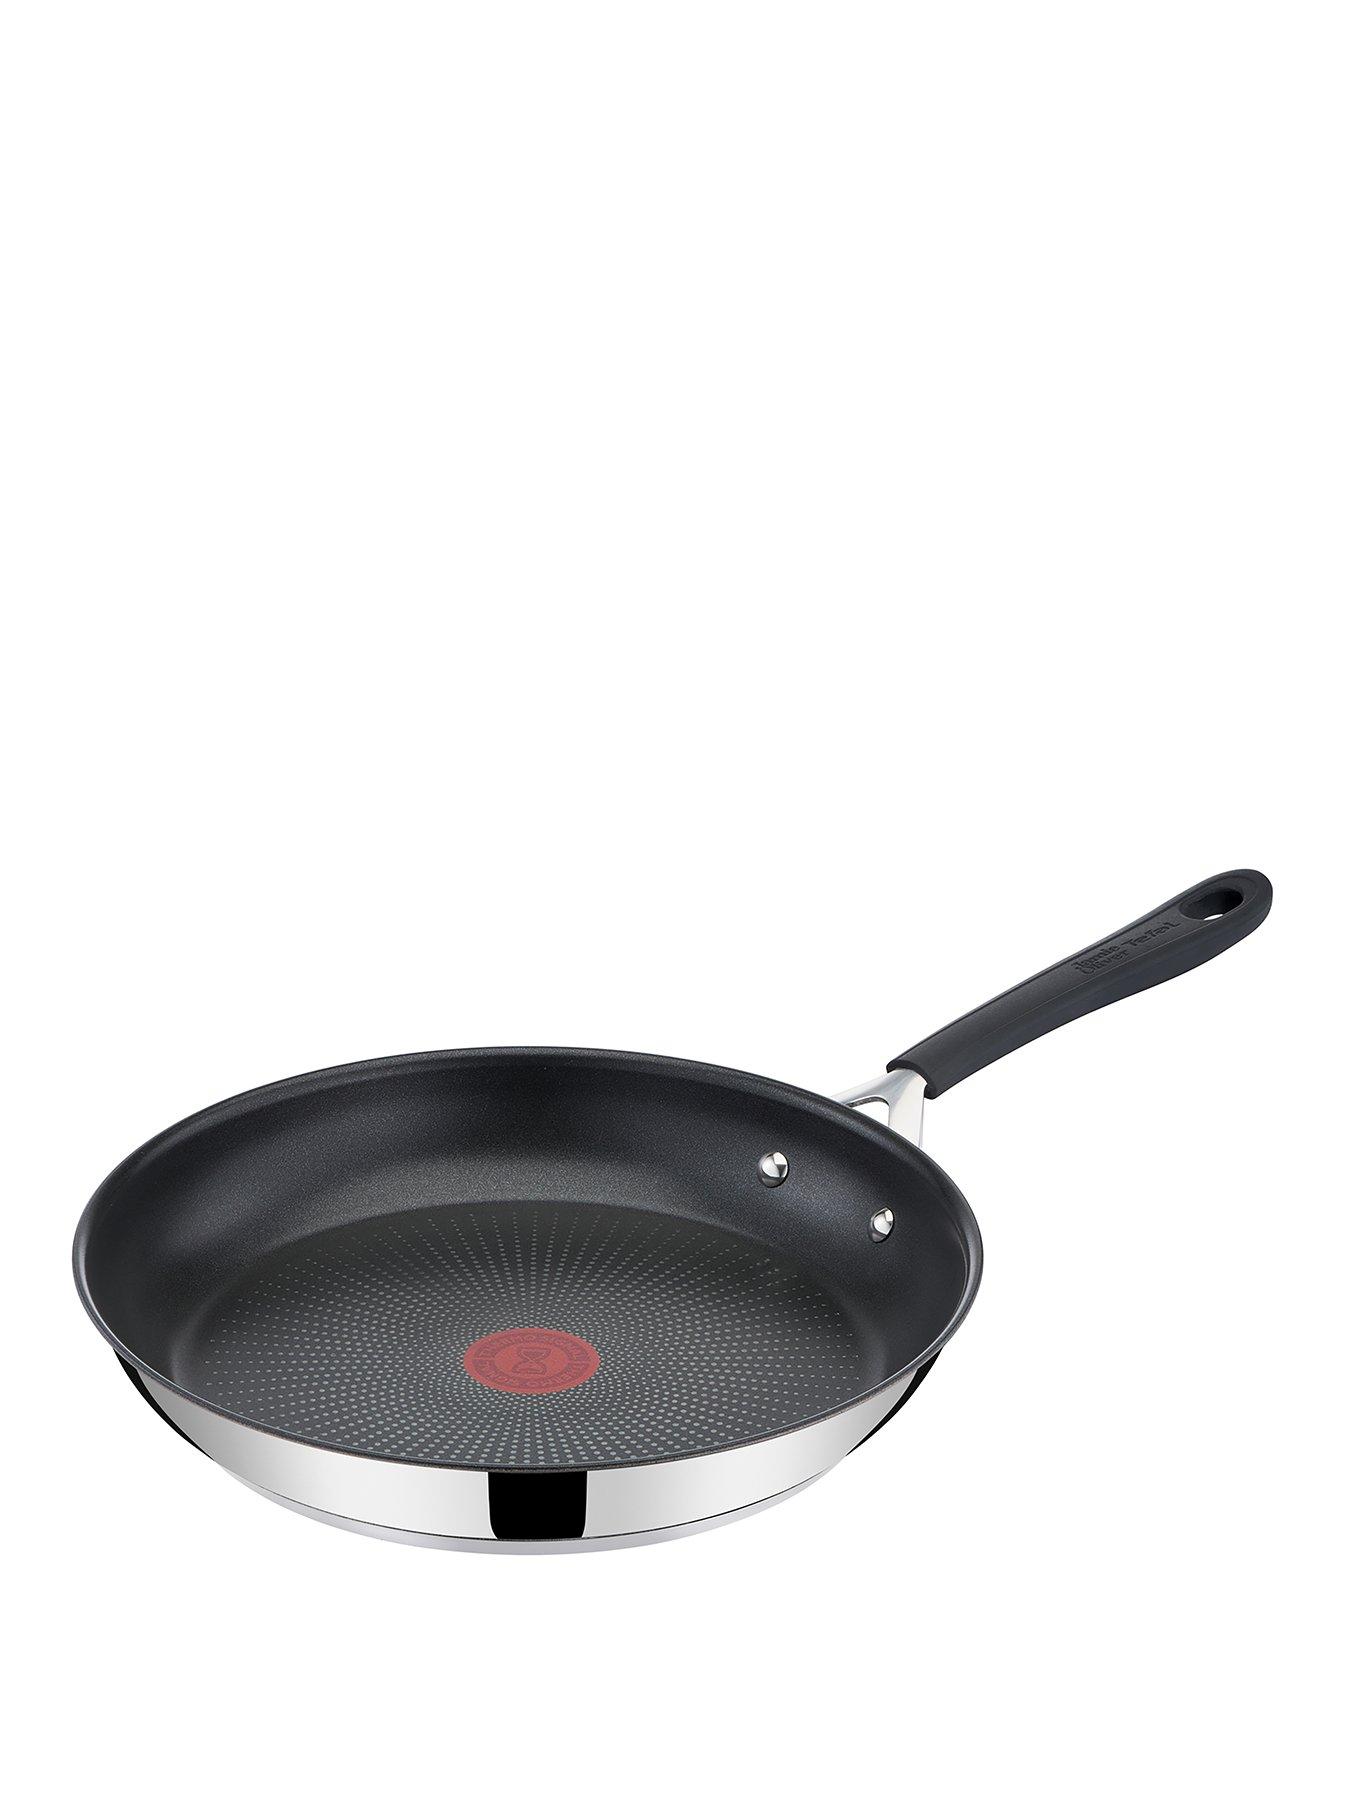 https://media.littlewoods.com/i/littlewoods/VLJOZ_SQ1_0000000088_NO_COLOR_SLf/tefal-jamie-oliver-by-tefal-quick-easy-stainless-steel-non-stick-induction-compatible-24cm-frying-pan.jpg?$180x240_retinamobilex2$